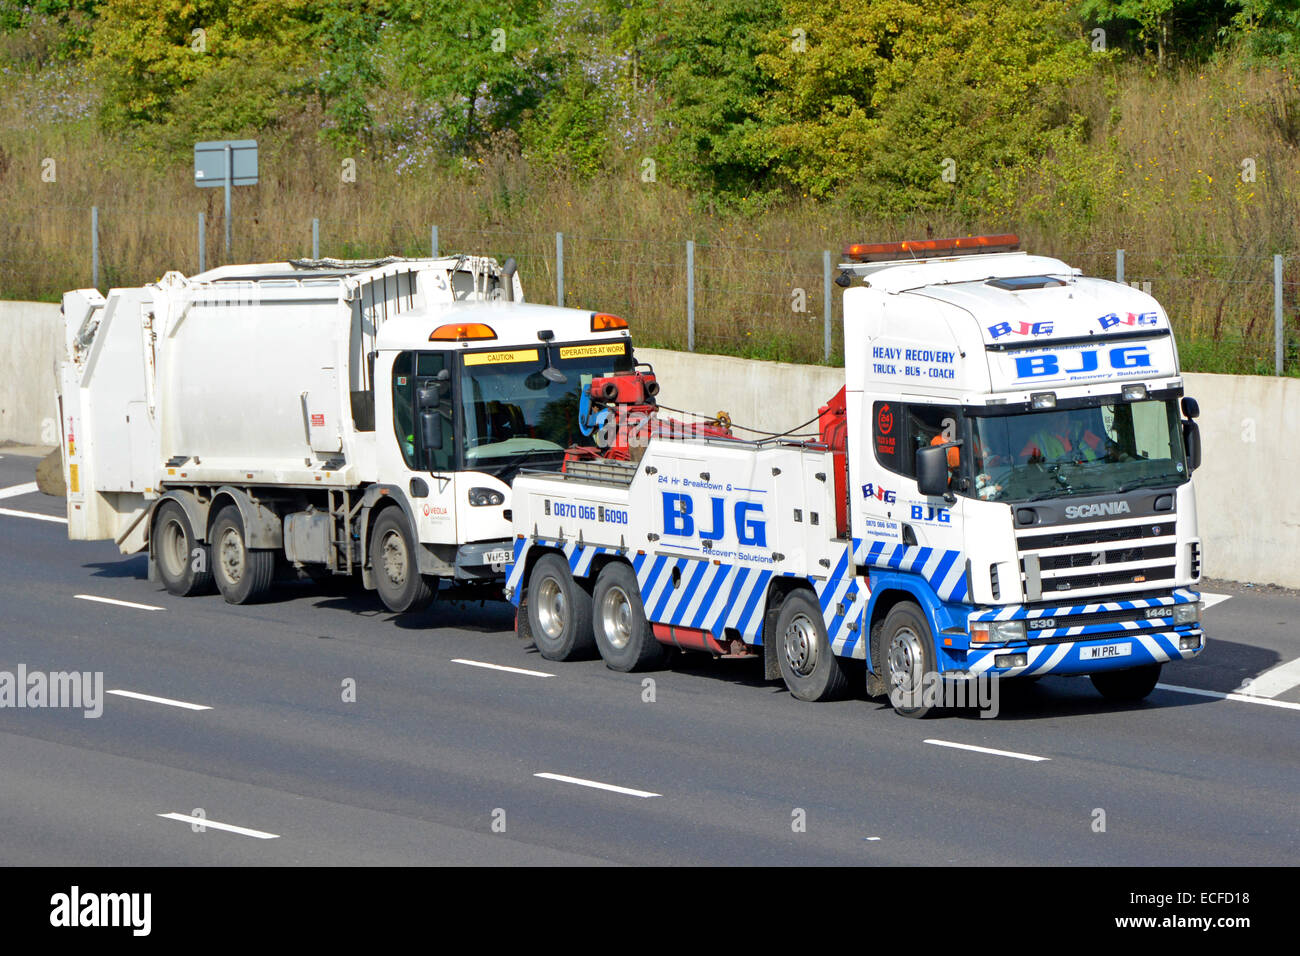 Heavy Scania breakdown tow truck moving a Veolia garbage lorry off of m25 motorway Stock Photo